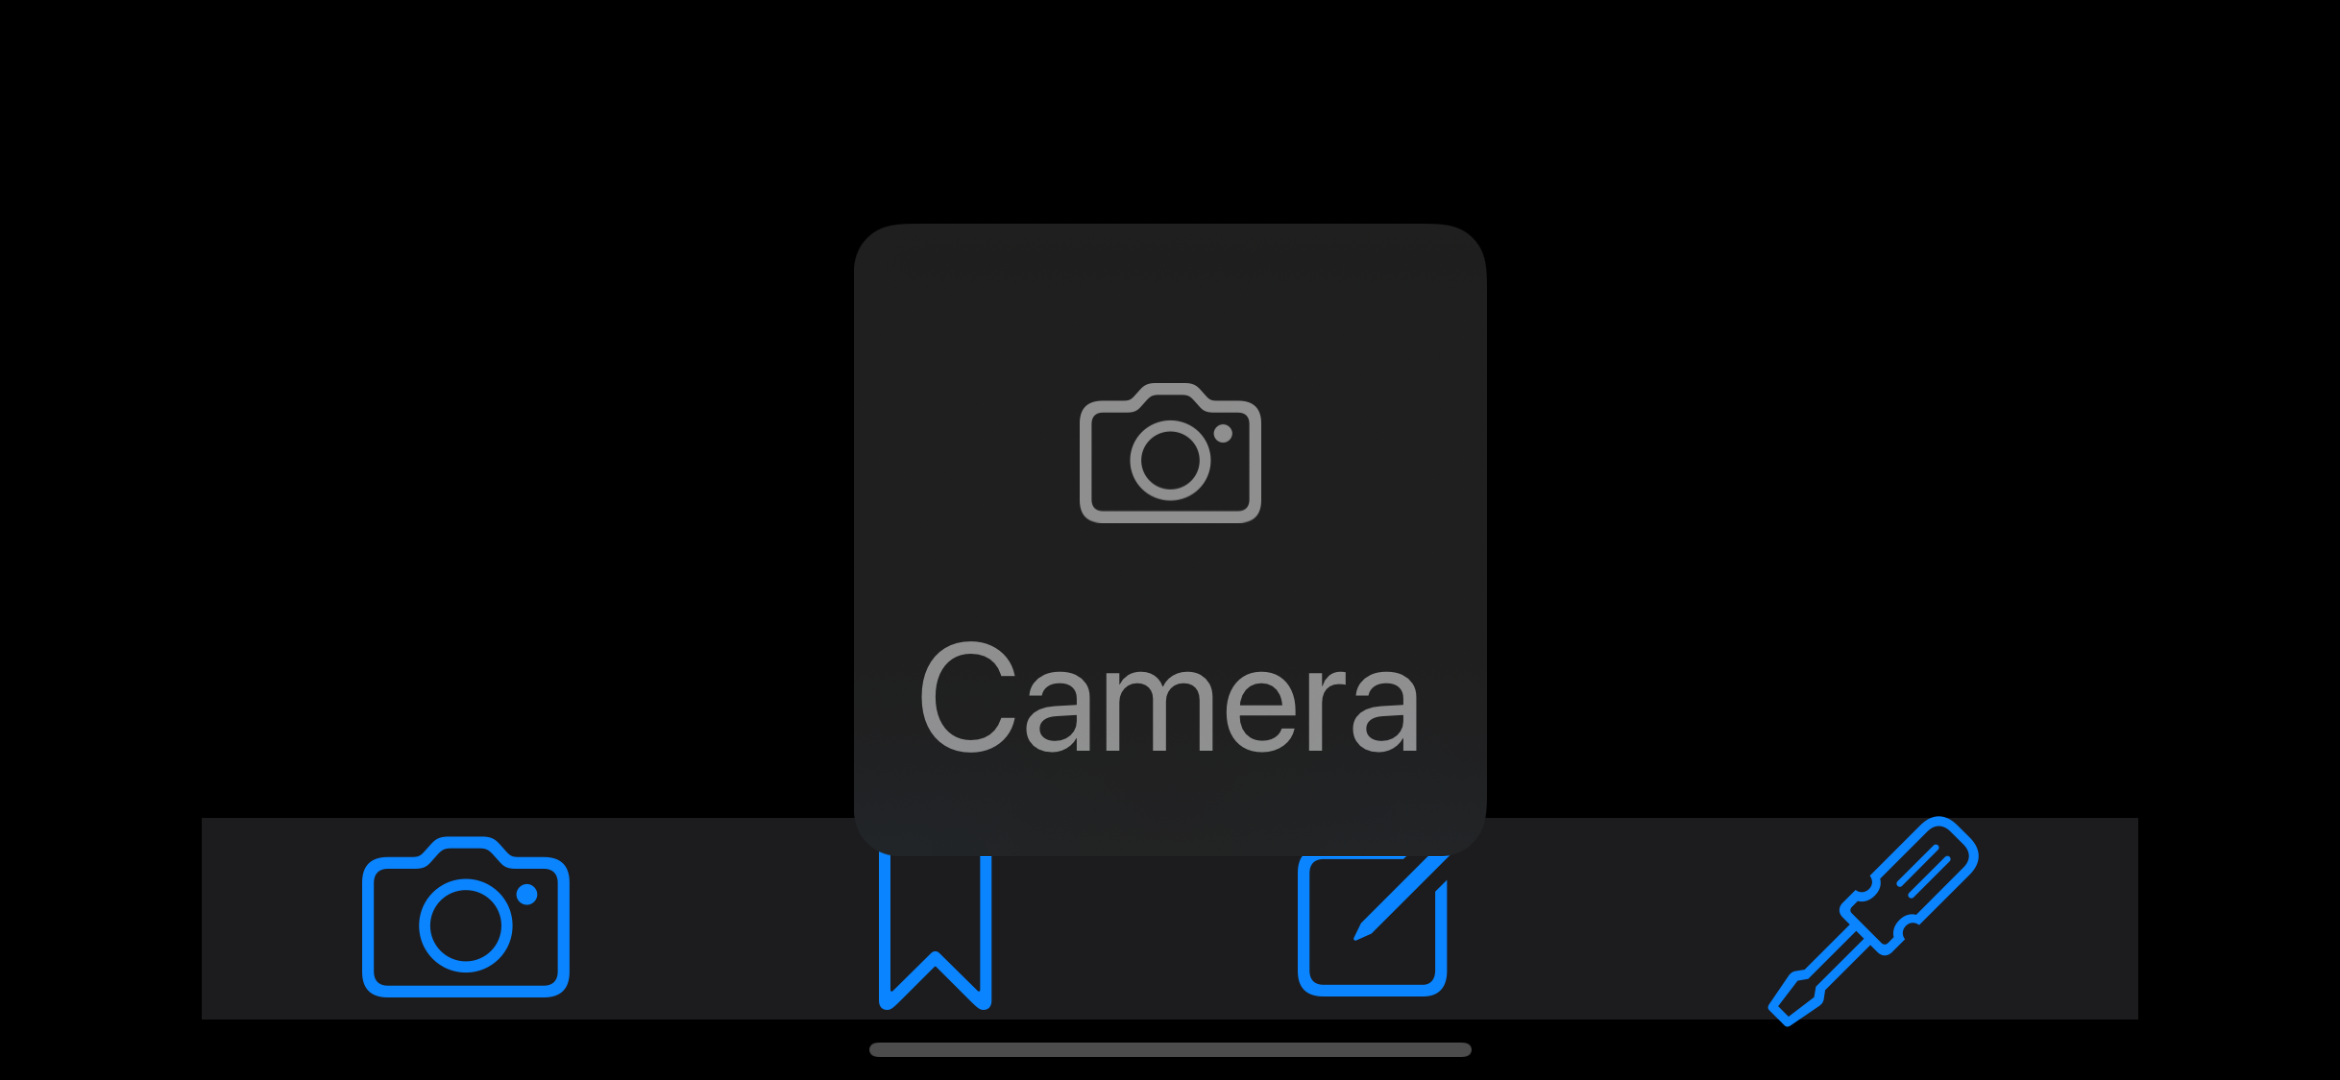 The custom tab bar showing the large content viewer for the camera button.